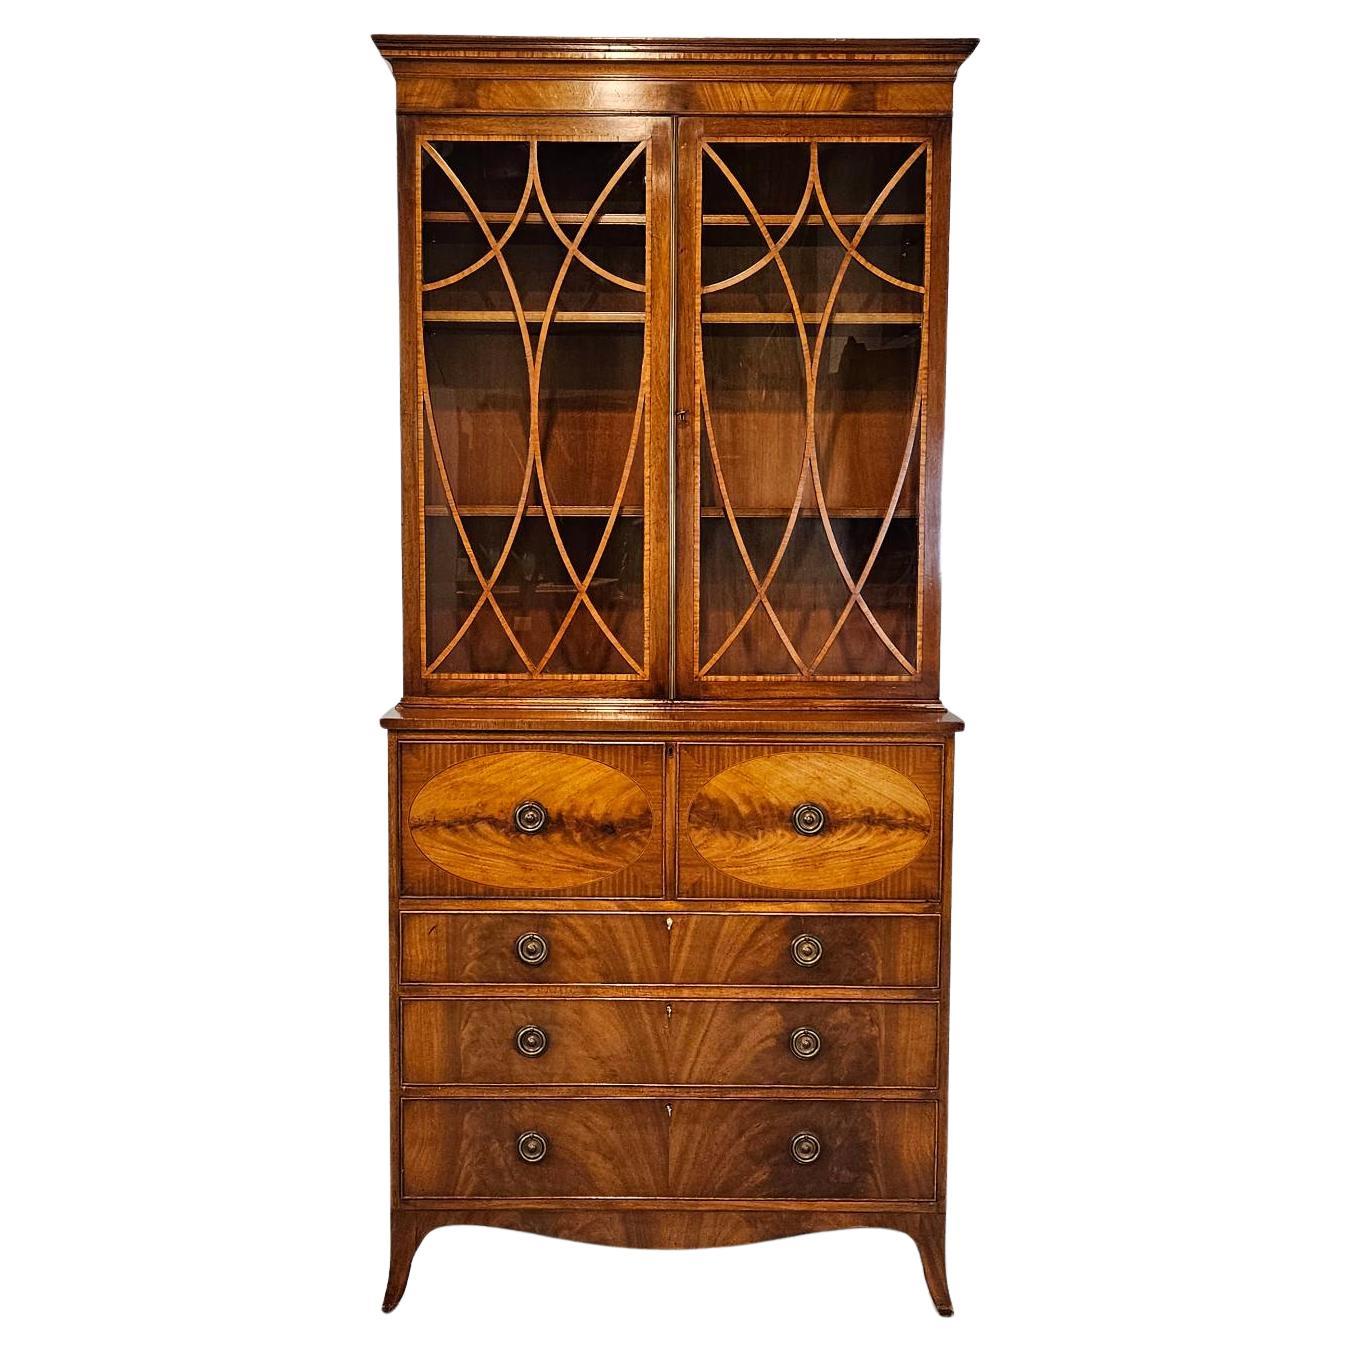 Georgian Style English Desk Bureau Bookcase with Banded Drawers, Leather Top For Sale